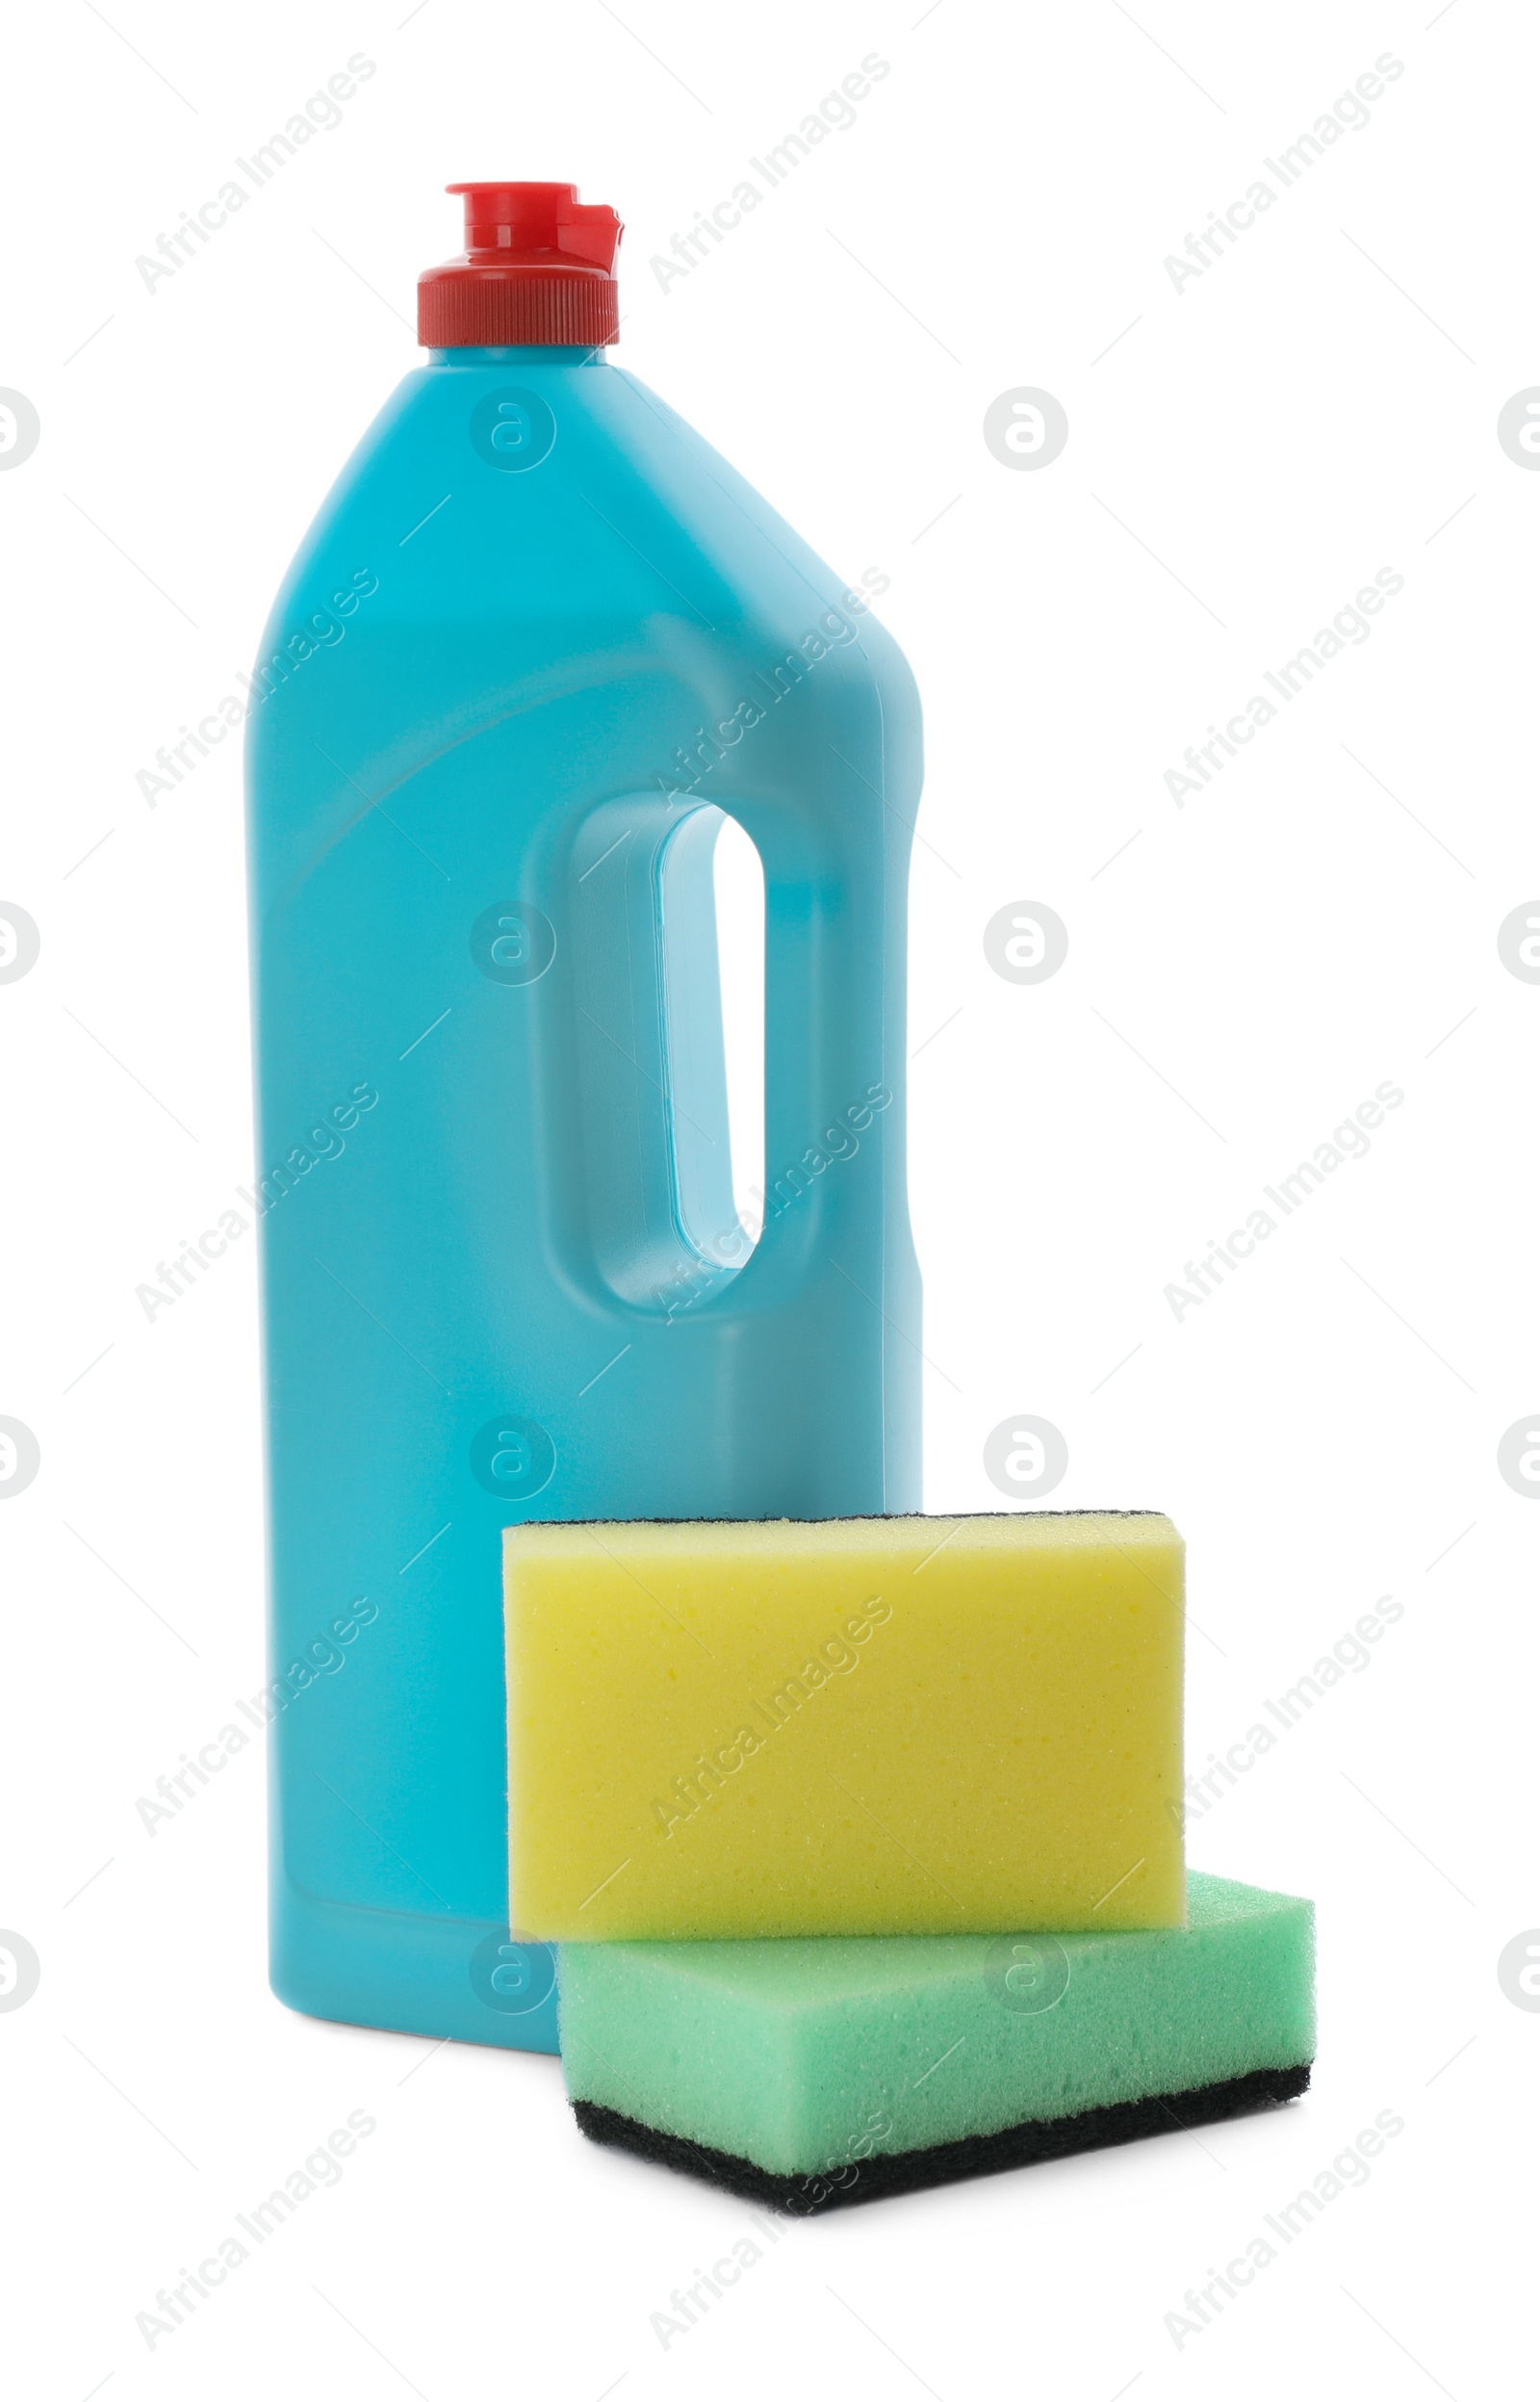 Photo of Bottle of detergent and cleaning sponges on white background